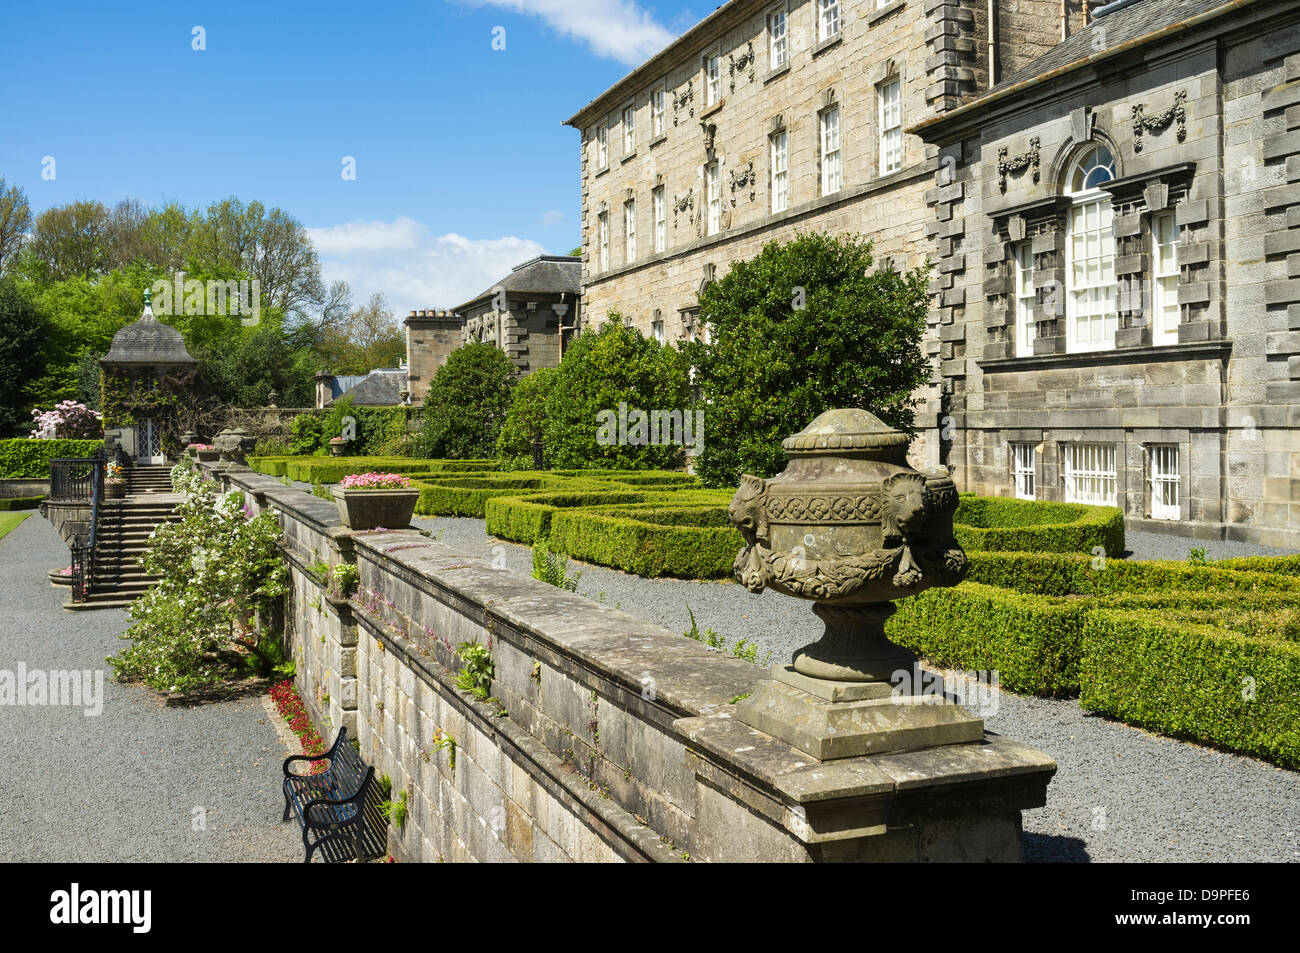 Pollok House, an 18th century mansion, designed by William Adam, on the outskirts of Glasgow, Scotland. Stock Photo